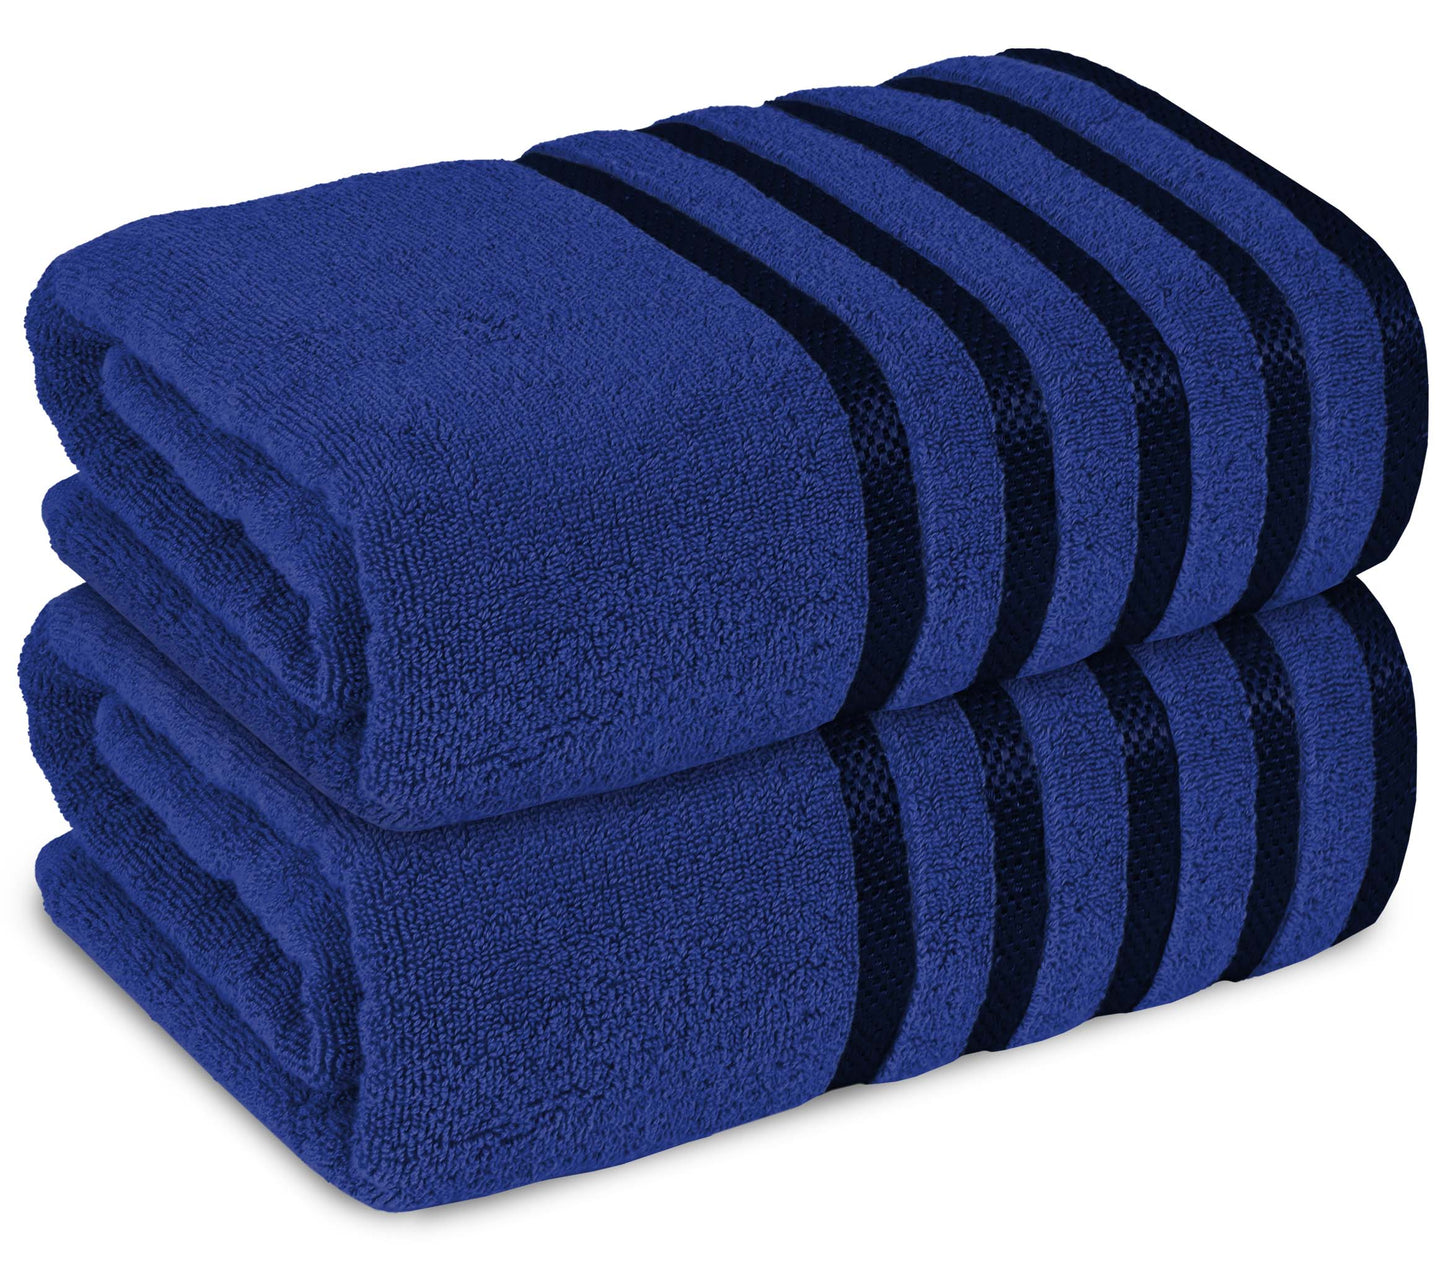 2 Pc ultrasoft and quick dry viscose bath sheet set | Eco-friendly and skin-friendly made of 100% Cotton | 2 bath sheets 90x180cm / 35x70inch-Towel Set-Weave Essentials-2x Jumbo Bath Sheet-Navy Blue-Weave Essentials